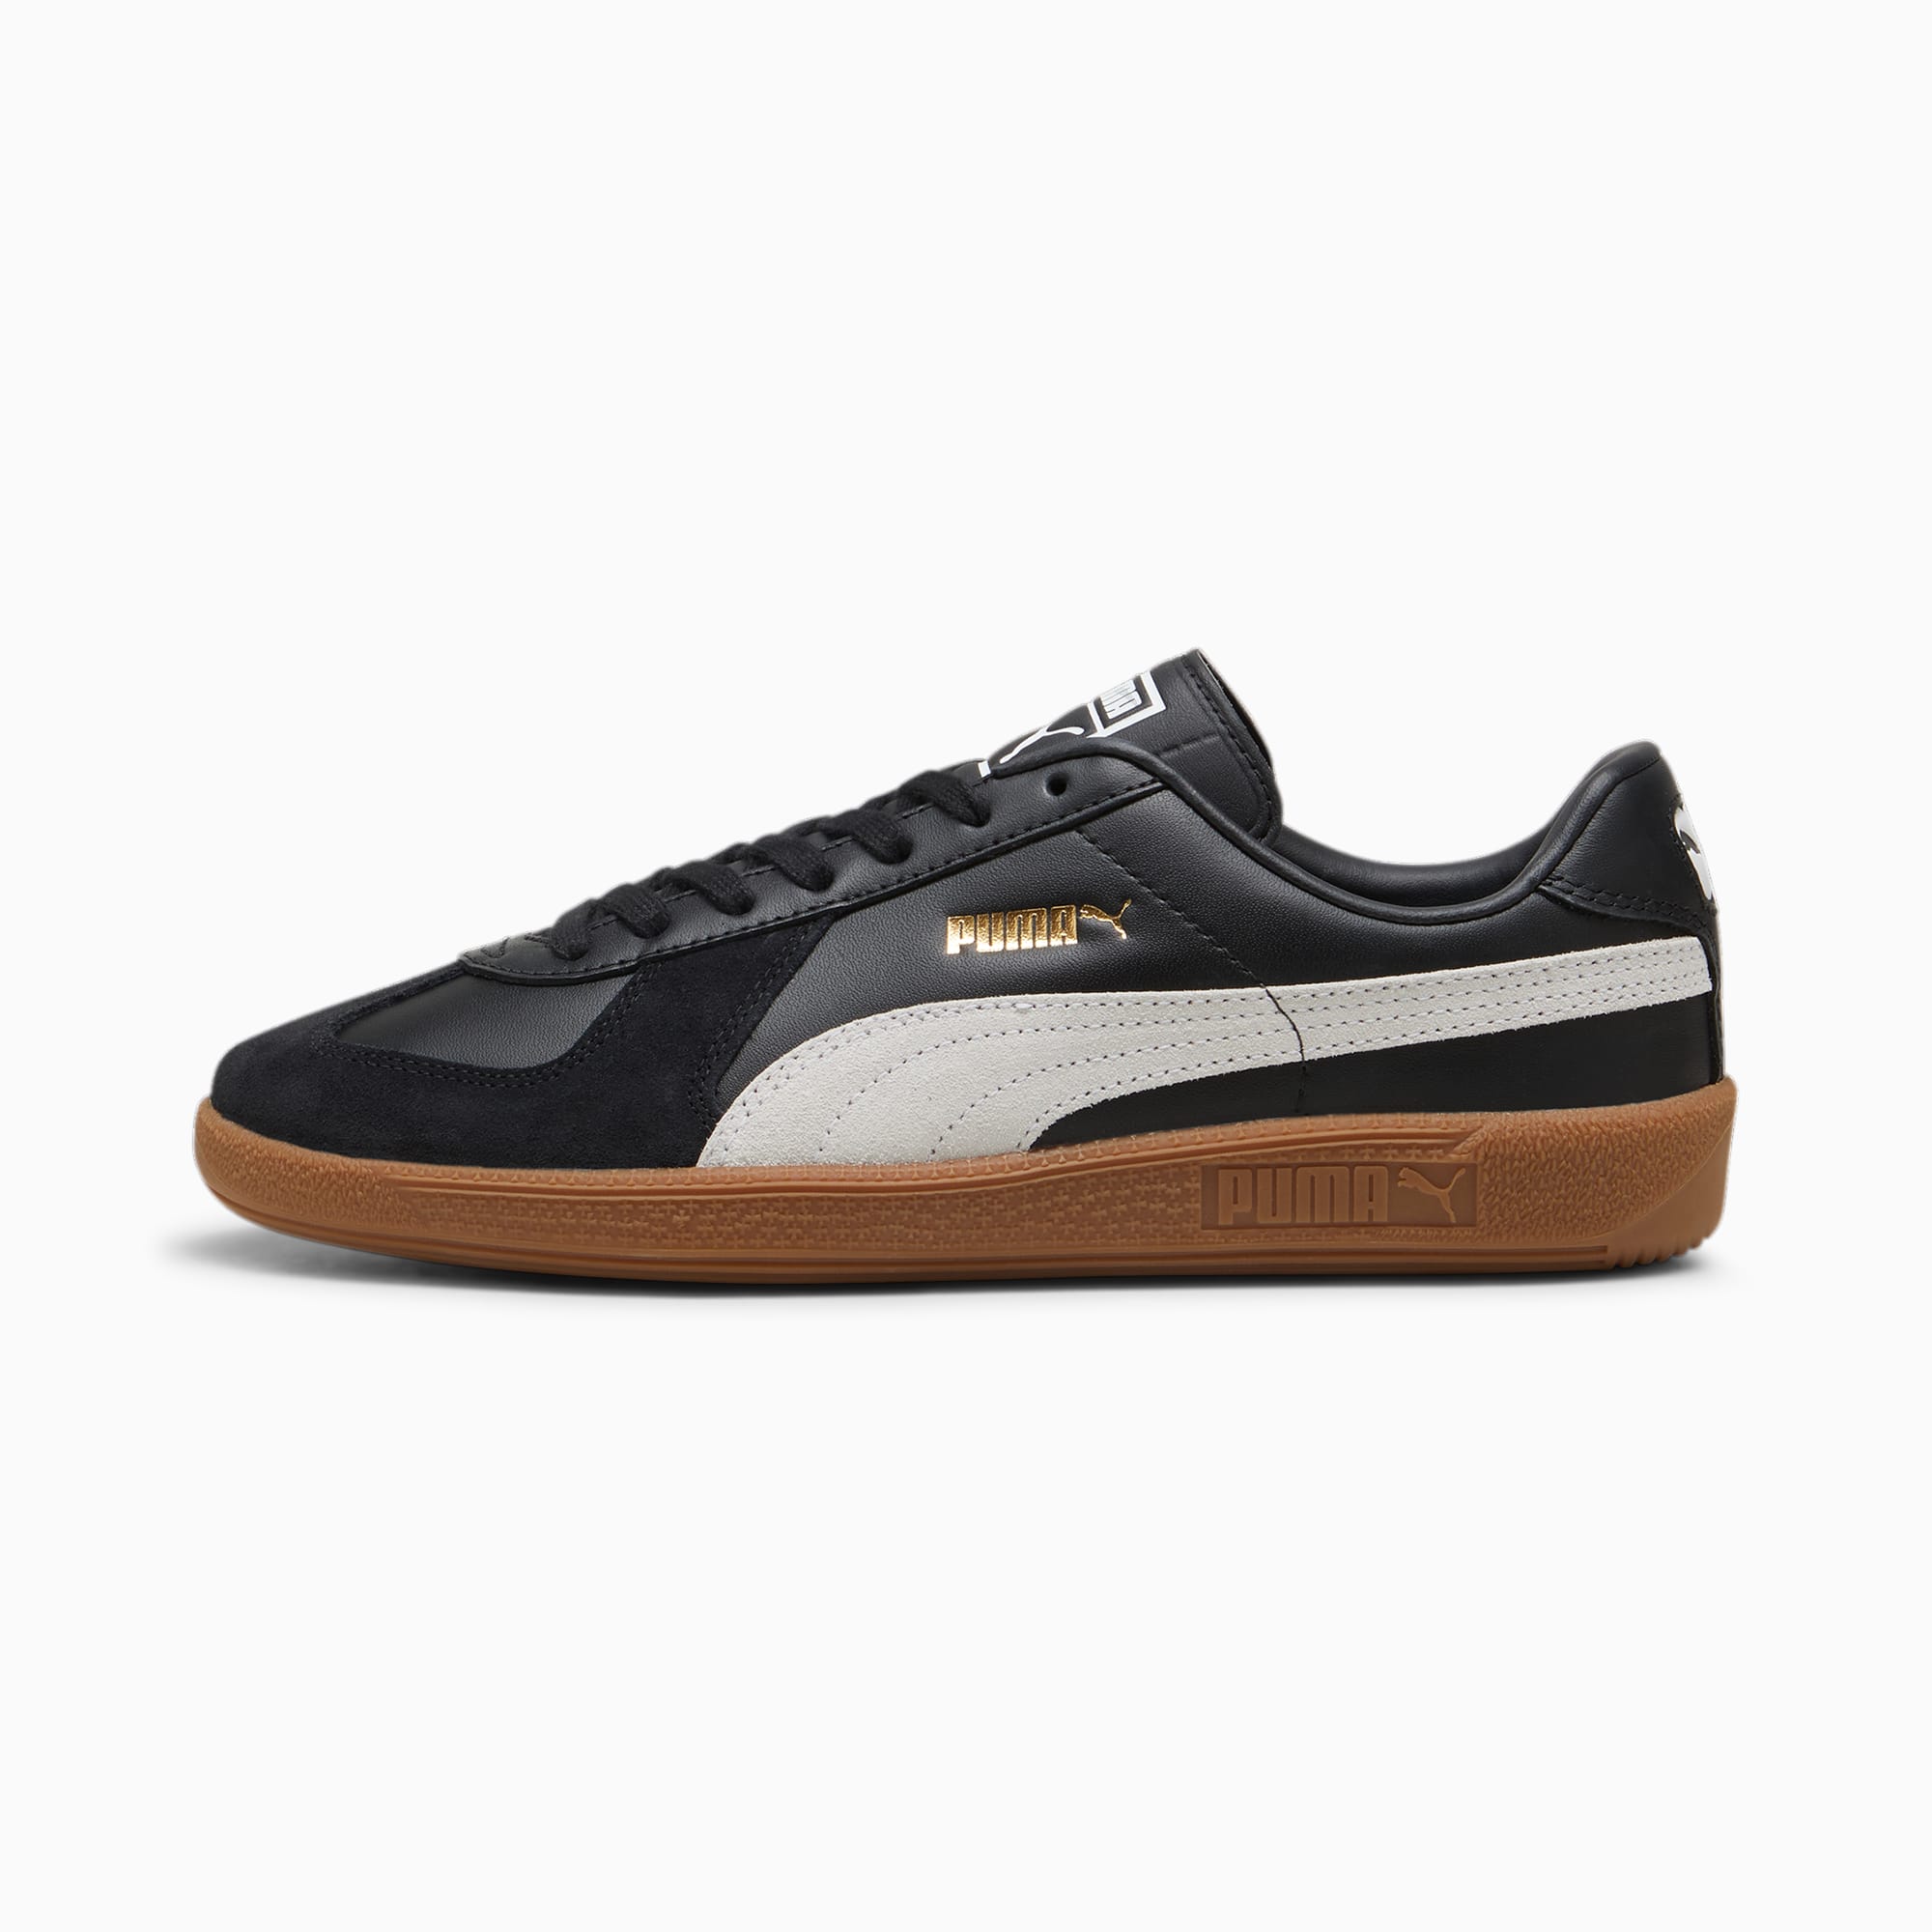 Women's PUMA Army Trainer Sneakers, Black/White/Gum, Size 37,5, Shoes